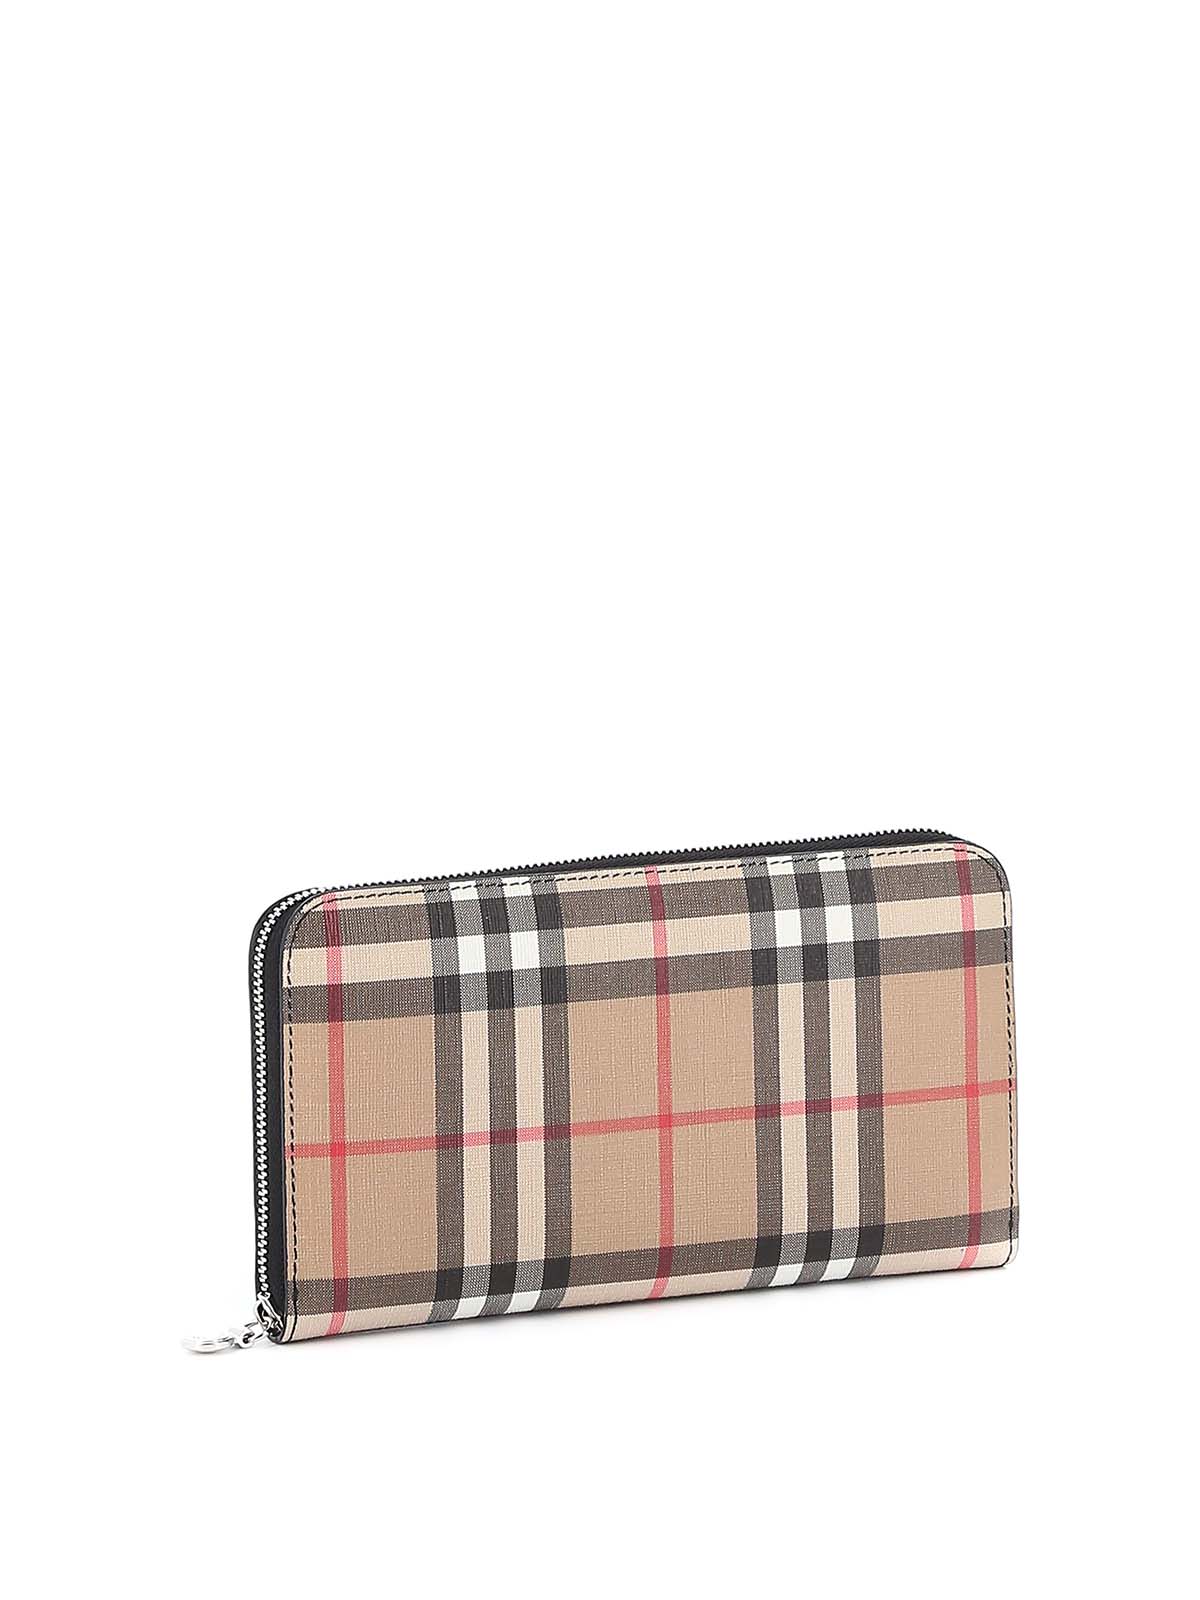 NWT BURBERRY BURBERRY LILA VINTAGE CHECK BIFOLD WALLET